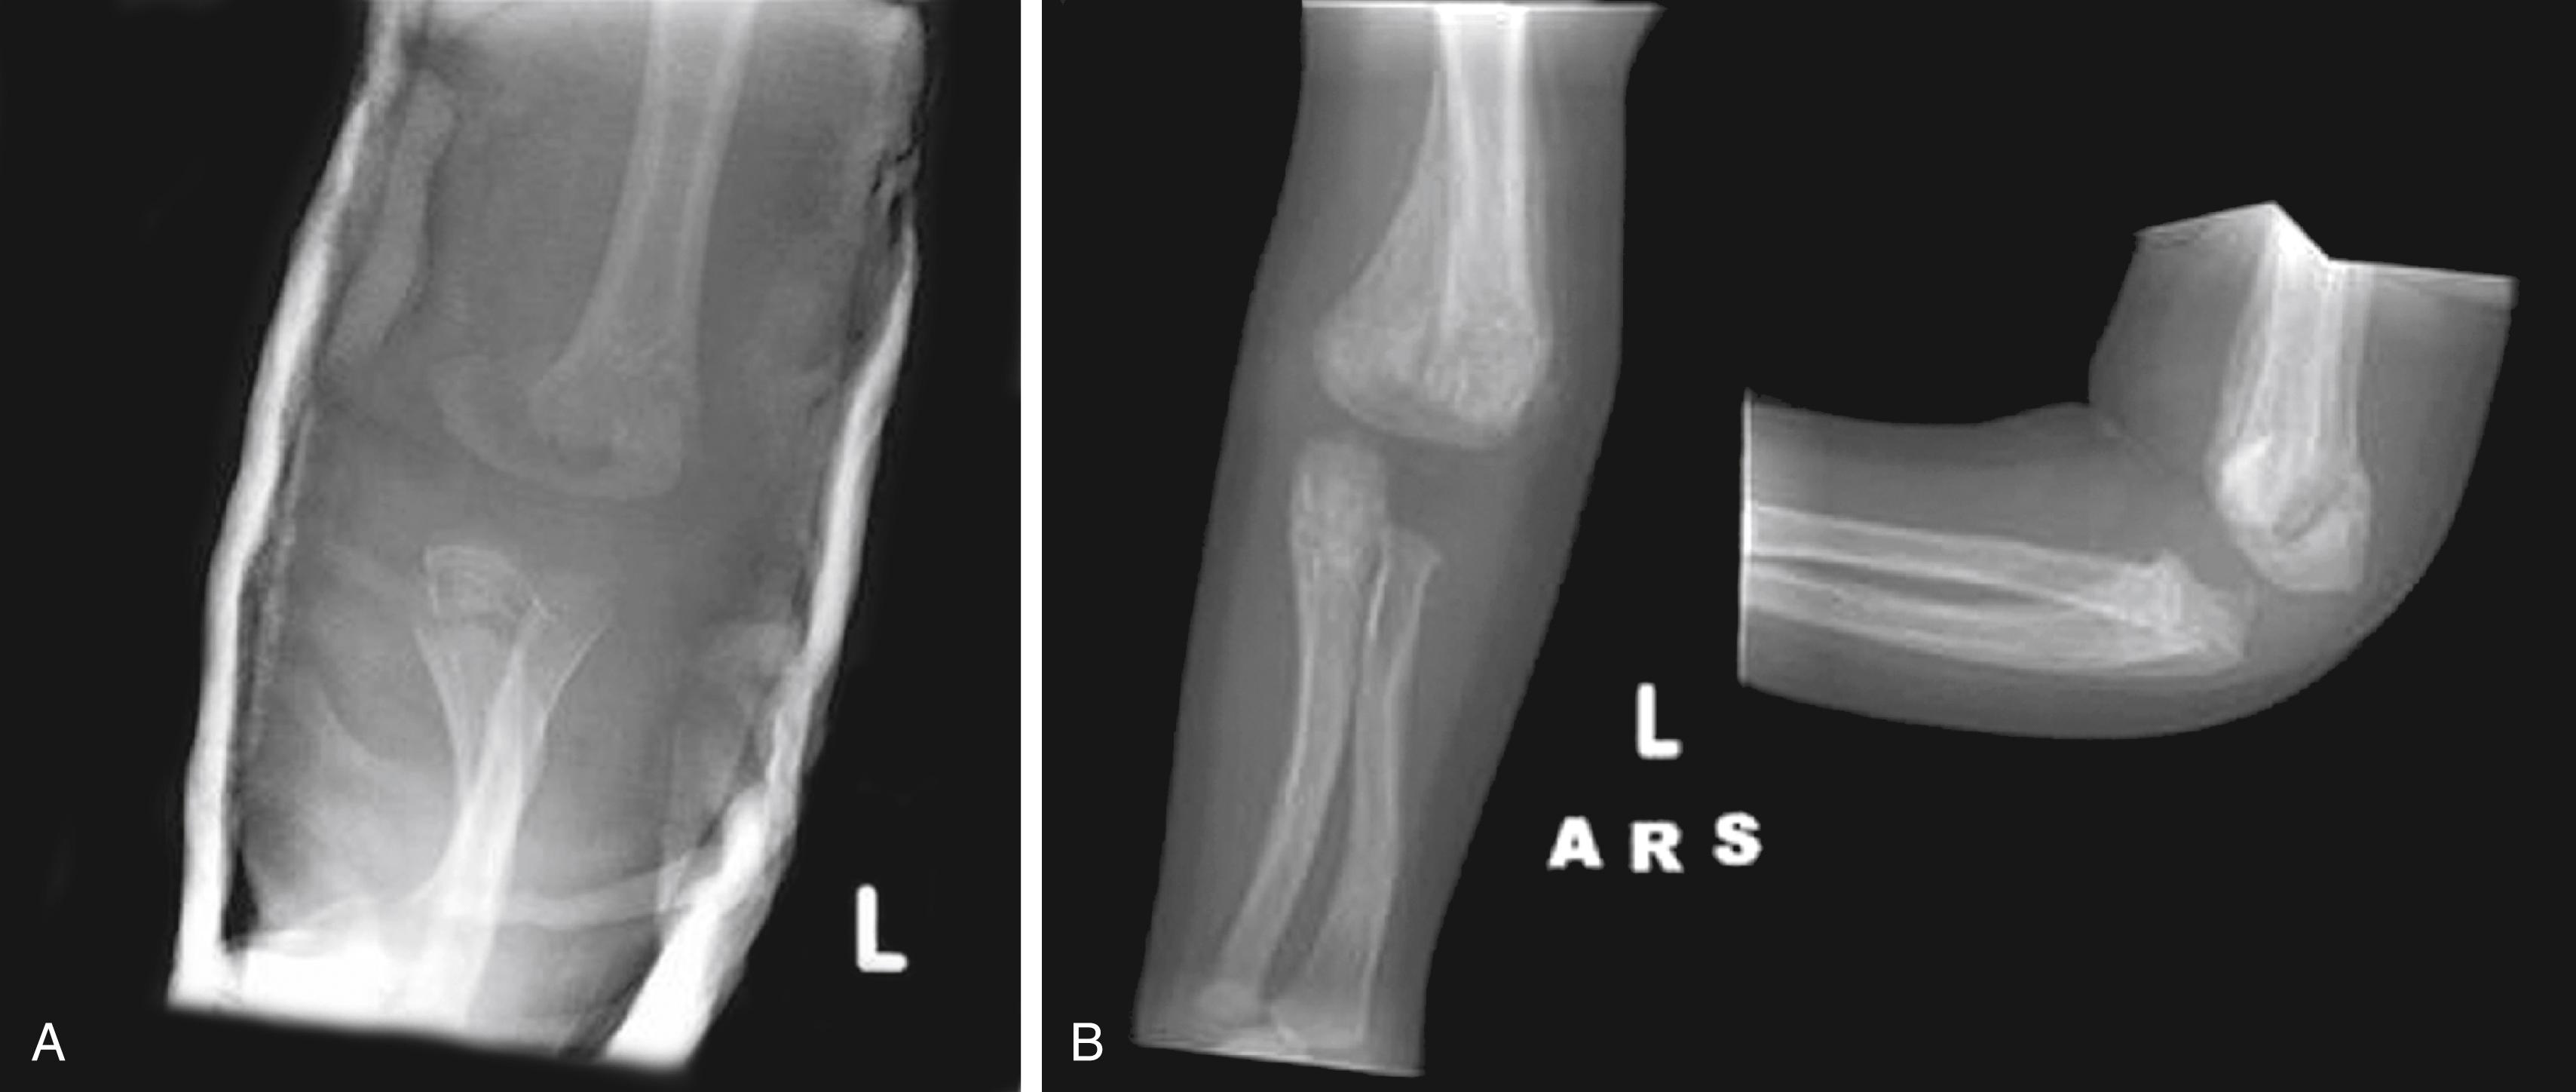 Fig. 22.44, Inflicted elbow fractures. This 10-month-old was brought in with a history of a minor fall and decreased use of his arm. (A) However, radiographs revealed displaced transverse fractures of both the distal humerus and proximal ulna along with marked soft tissue swelling. These findings were incompatible with the reported mechanism of injury and instead were the result of grabbing the arm and yanking the elbow into hyperextension with severe force. (B) Follow-up films 1 month later show prolific subperiosteal new bone formation.